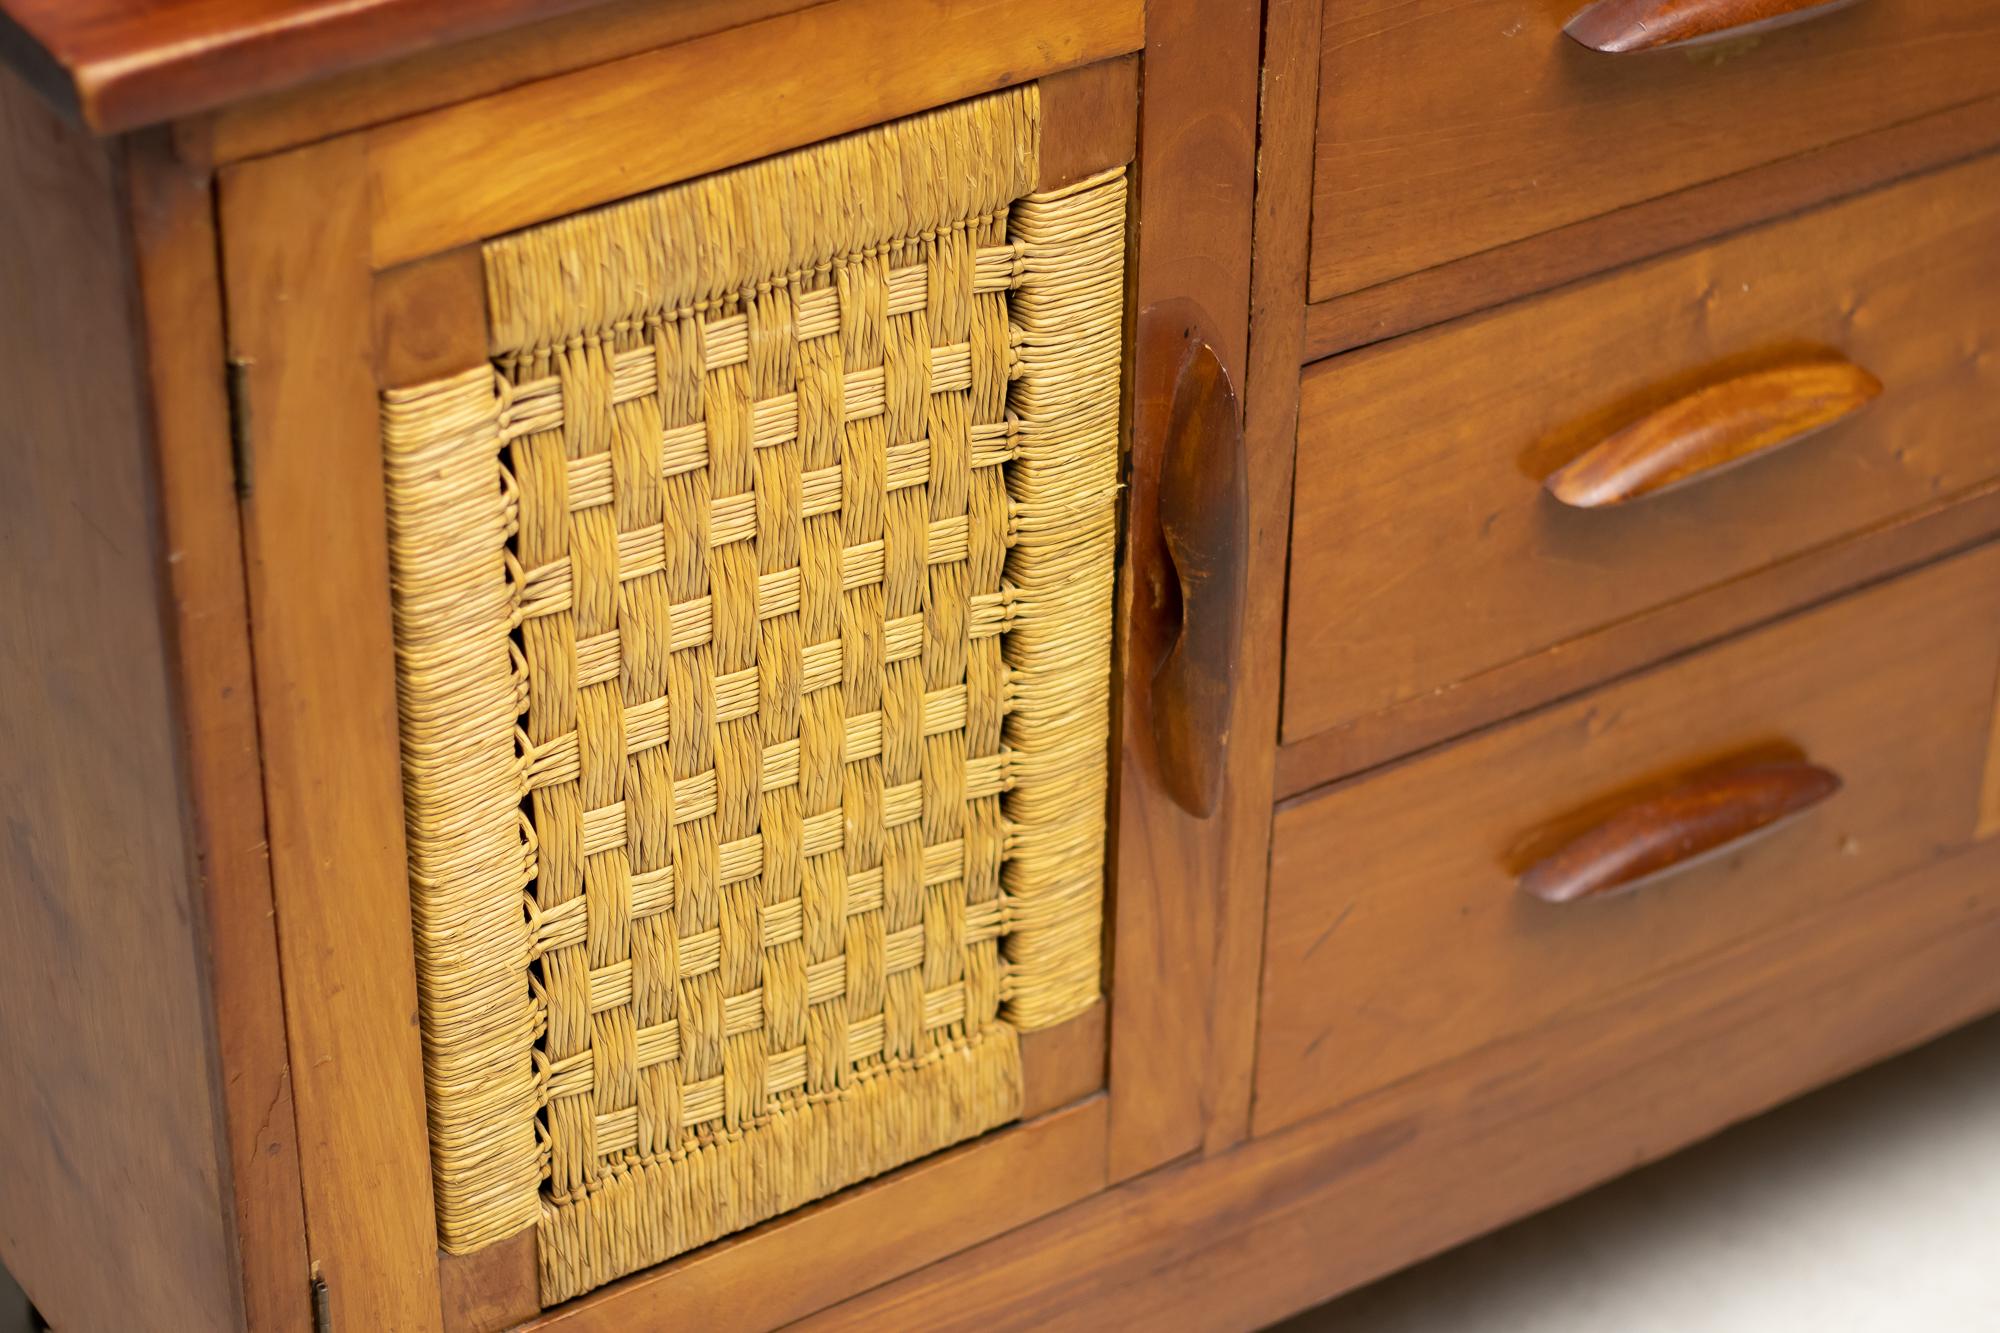 An important solid mahogany cupboard with doors on either side, 3 drawers at the centre and a display with sliding glass doors on top. The doors and sidewalls frame a beautiful basket weave of rattan cord. 

Provenance:
The office of the Mexican